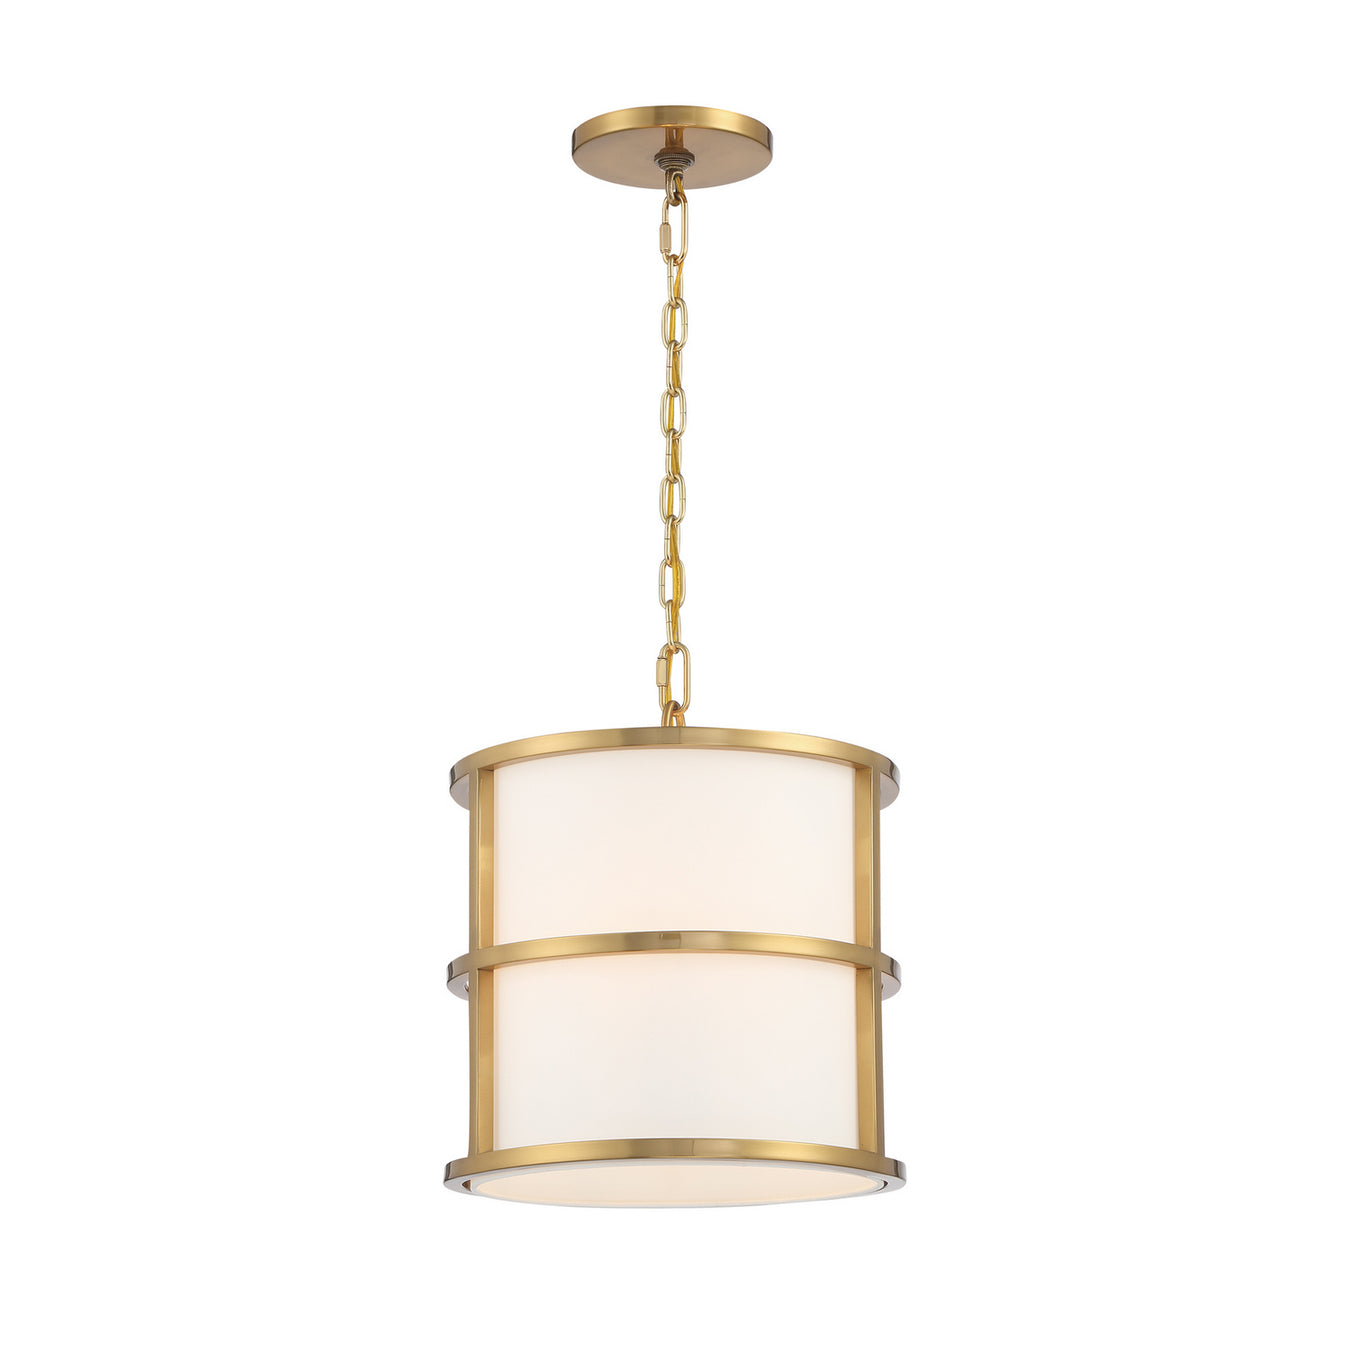 Hulton 3-Light Pendant in Luxe Gold by Crystorama - MPN 9593-LG